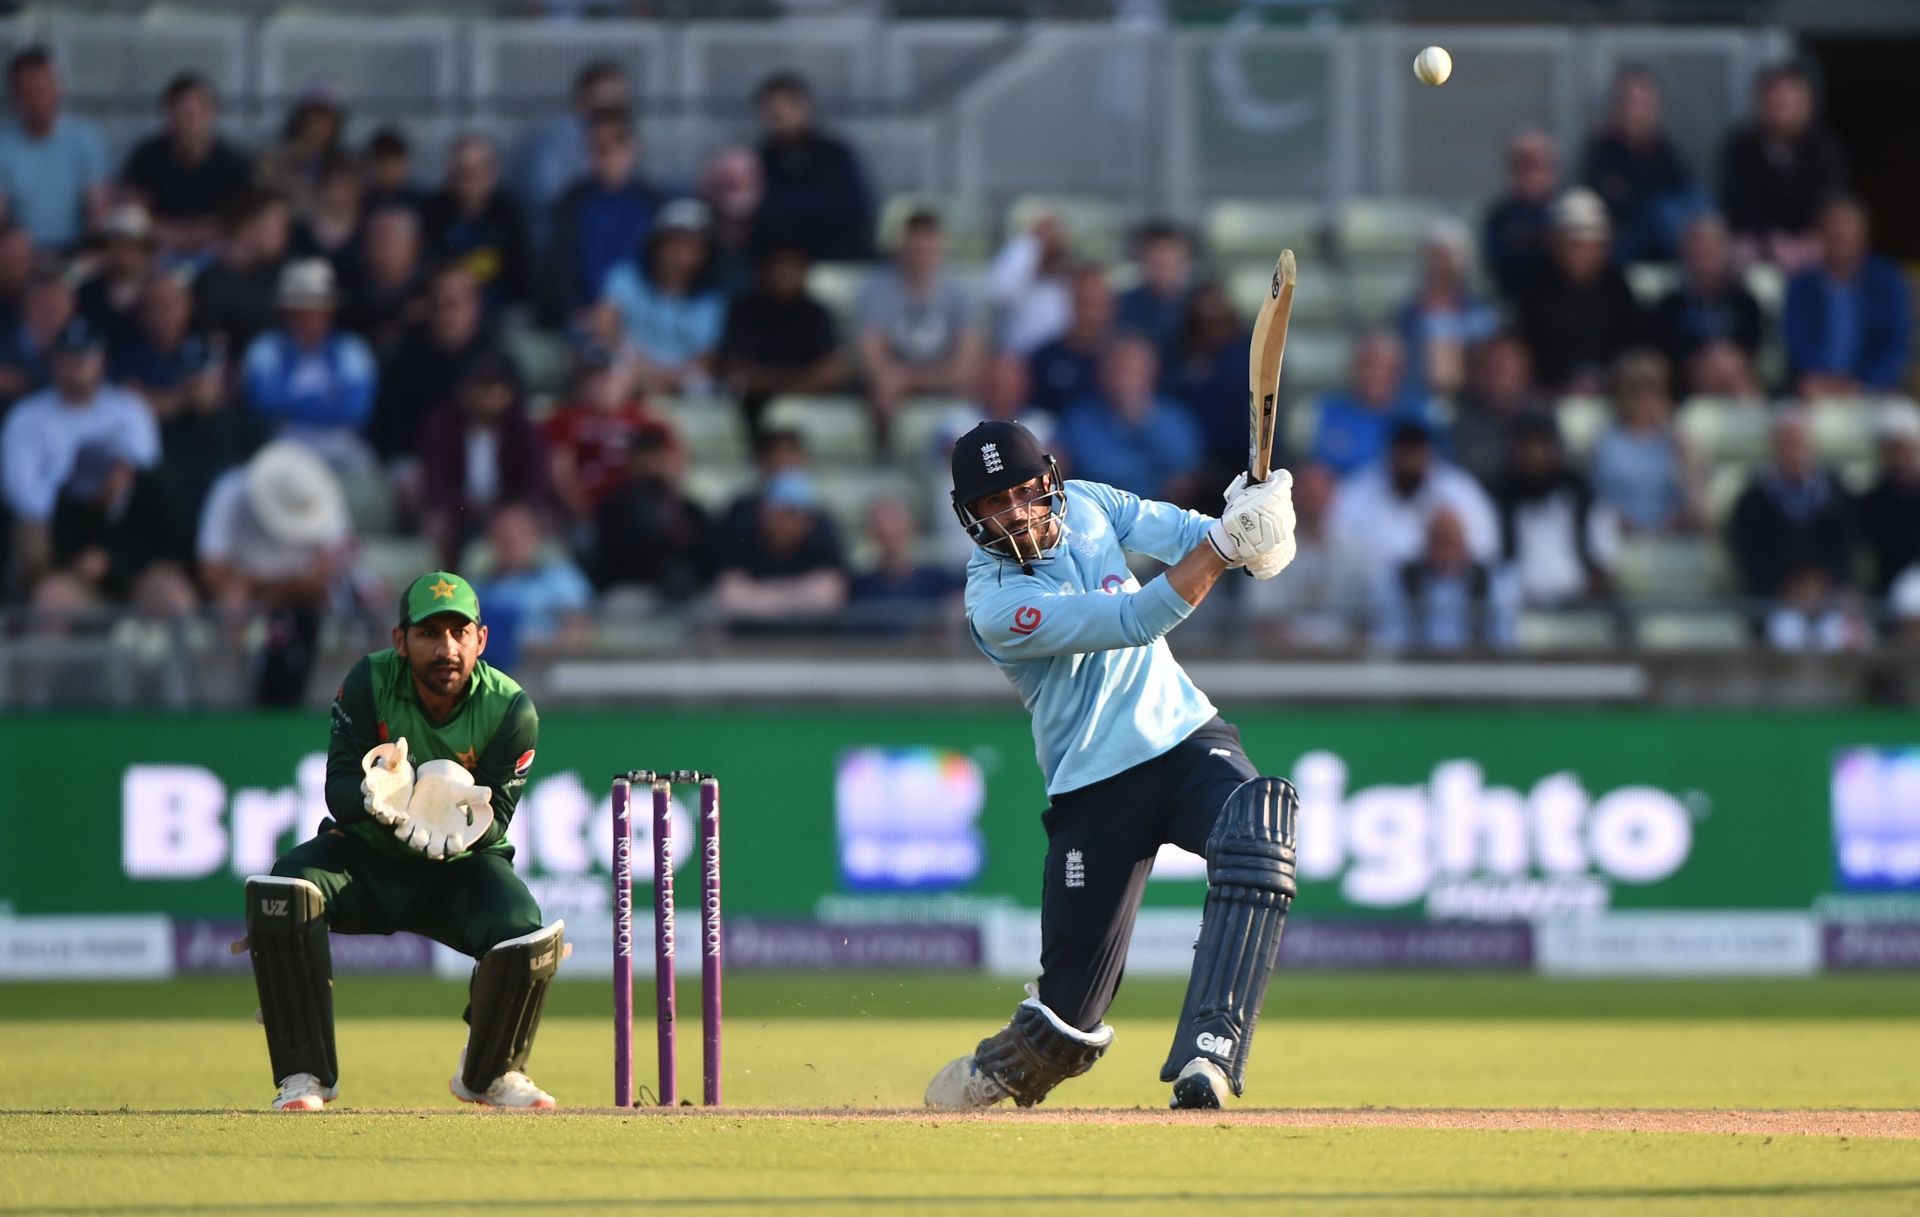 James Vince lofts one during the 3rd ODI against Pakistan. Pic: Getty Images